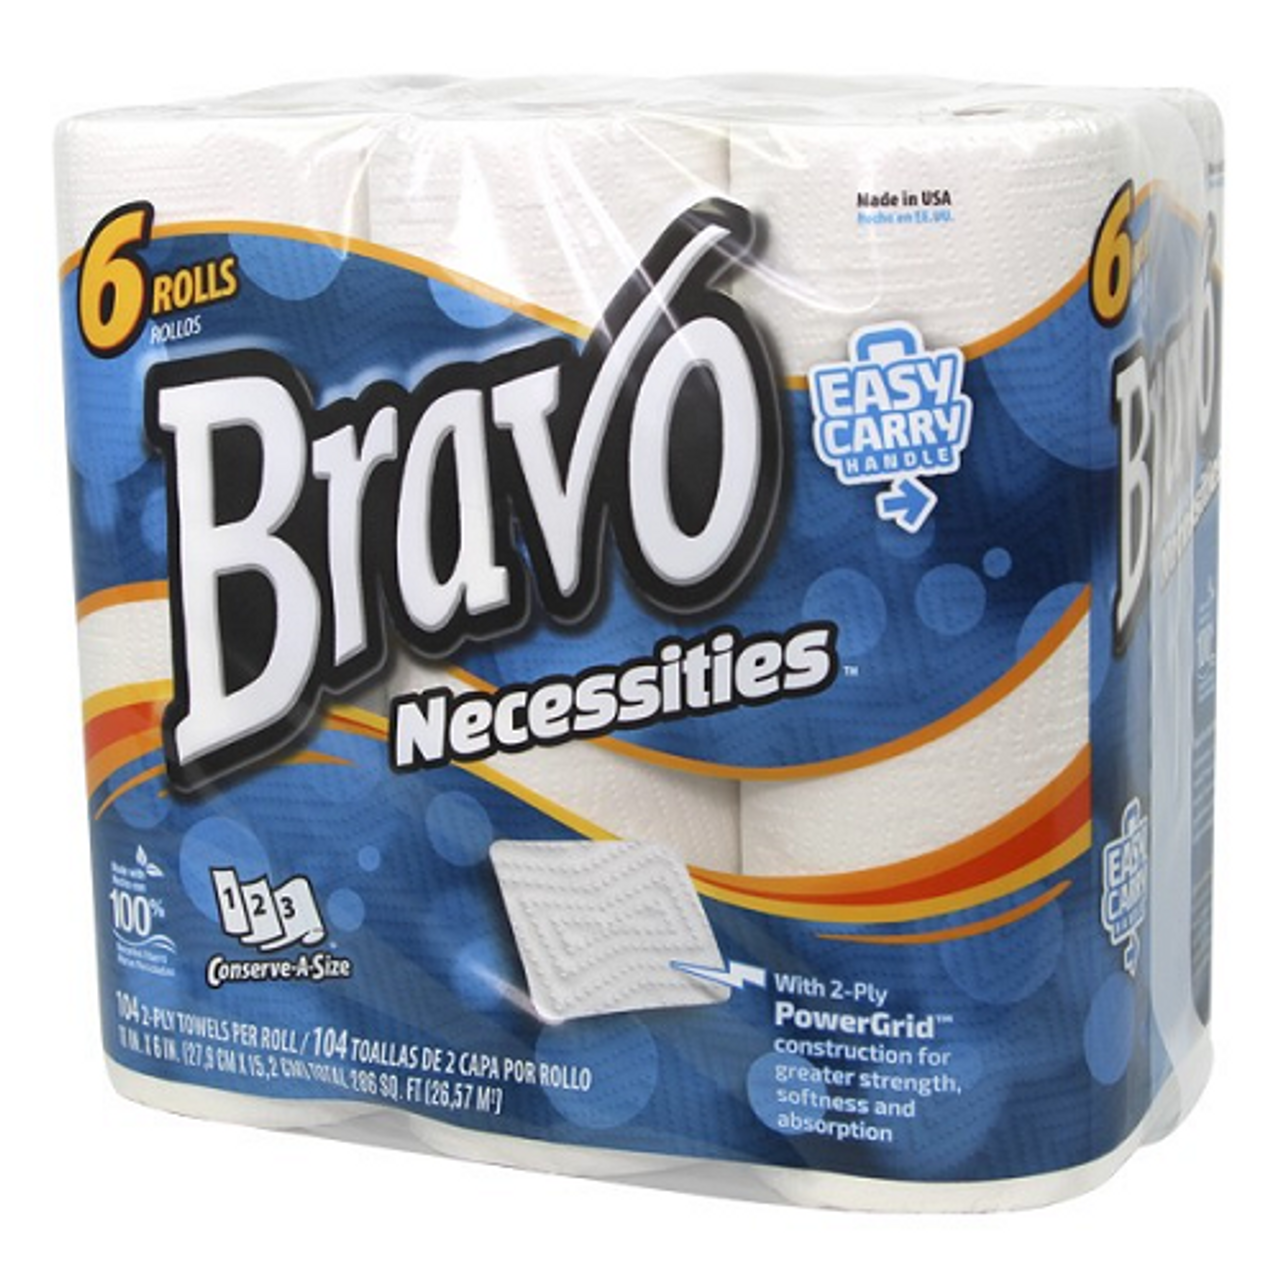 These economical paper towels are the perfect workhorse for day to day household chores, spills, and messes these unique 2-Ply PowerGrid design offers greater absorbency, softness, strength and reliability.